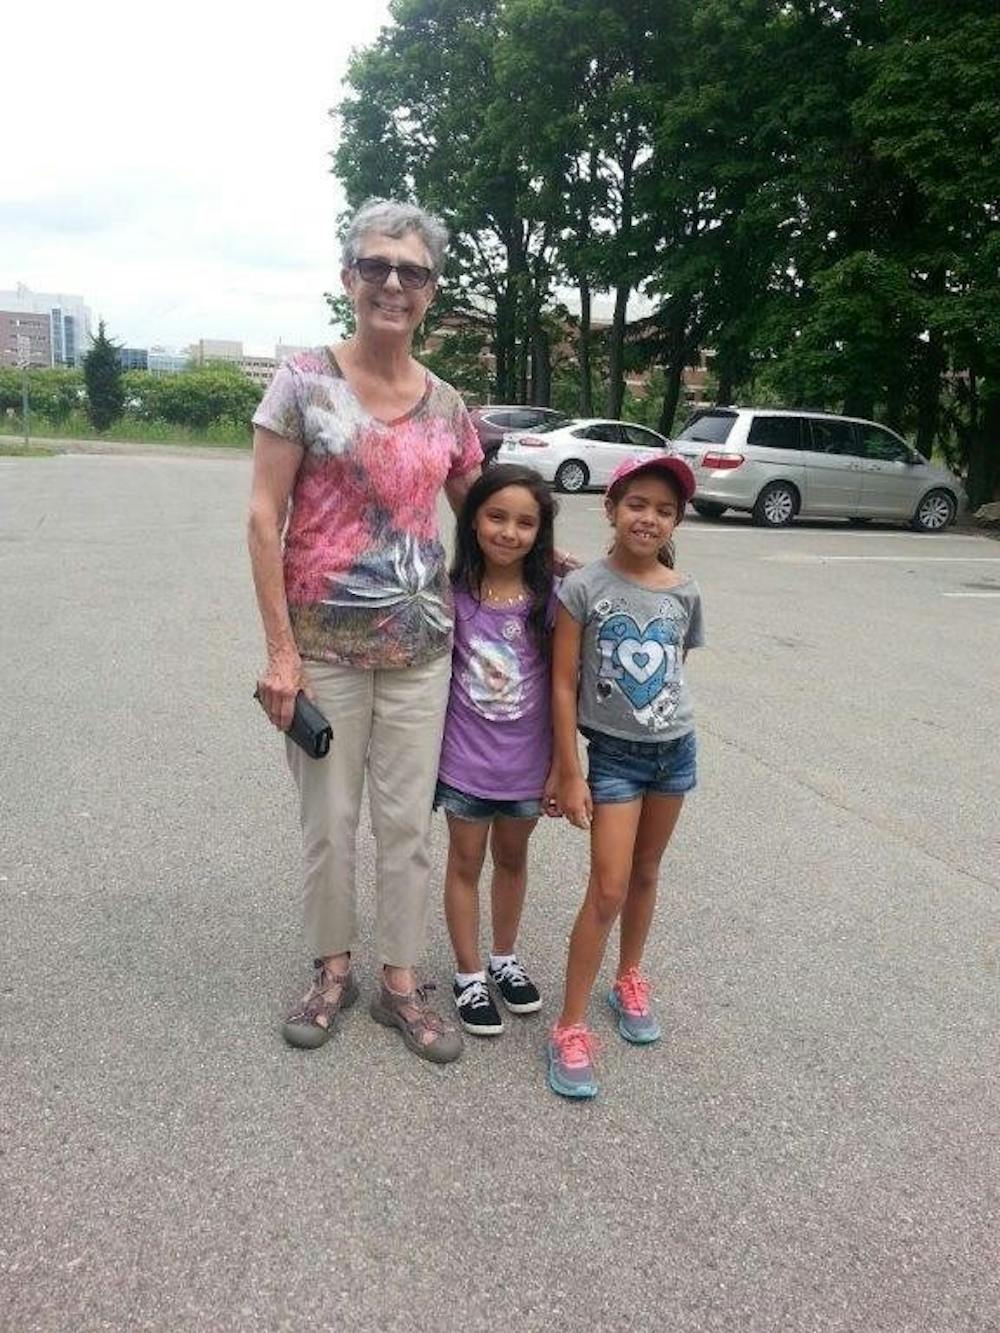 <p>74-year-old Williamston resident Jane Johnson poses for a photo with 8-year-old girls HallieJo Battisfore and Giselle Schneider after the two recovered her wallet on Monday, June 15 at the Clarence E. Lewis Landscape Arboretum. (Photo courtesy MSU Police)</p>